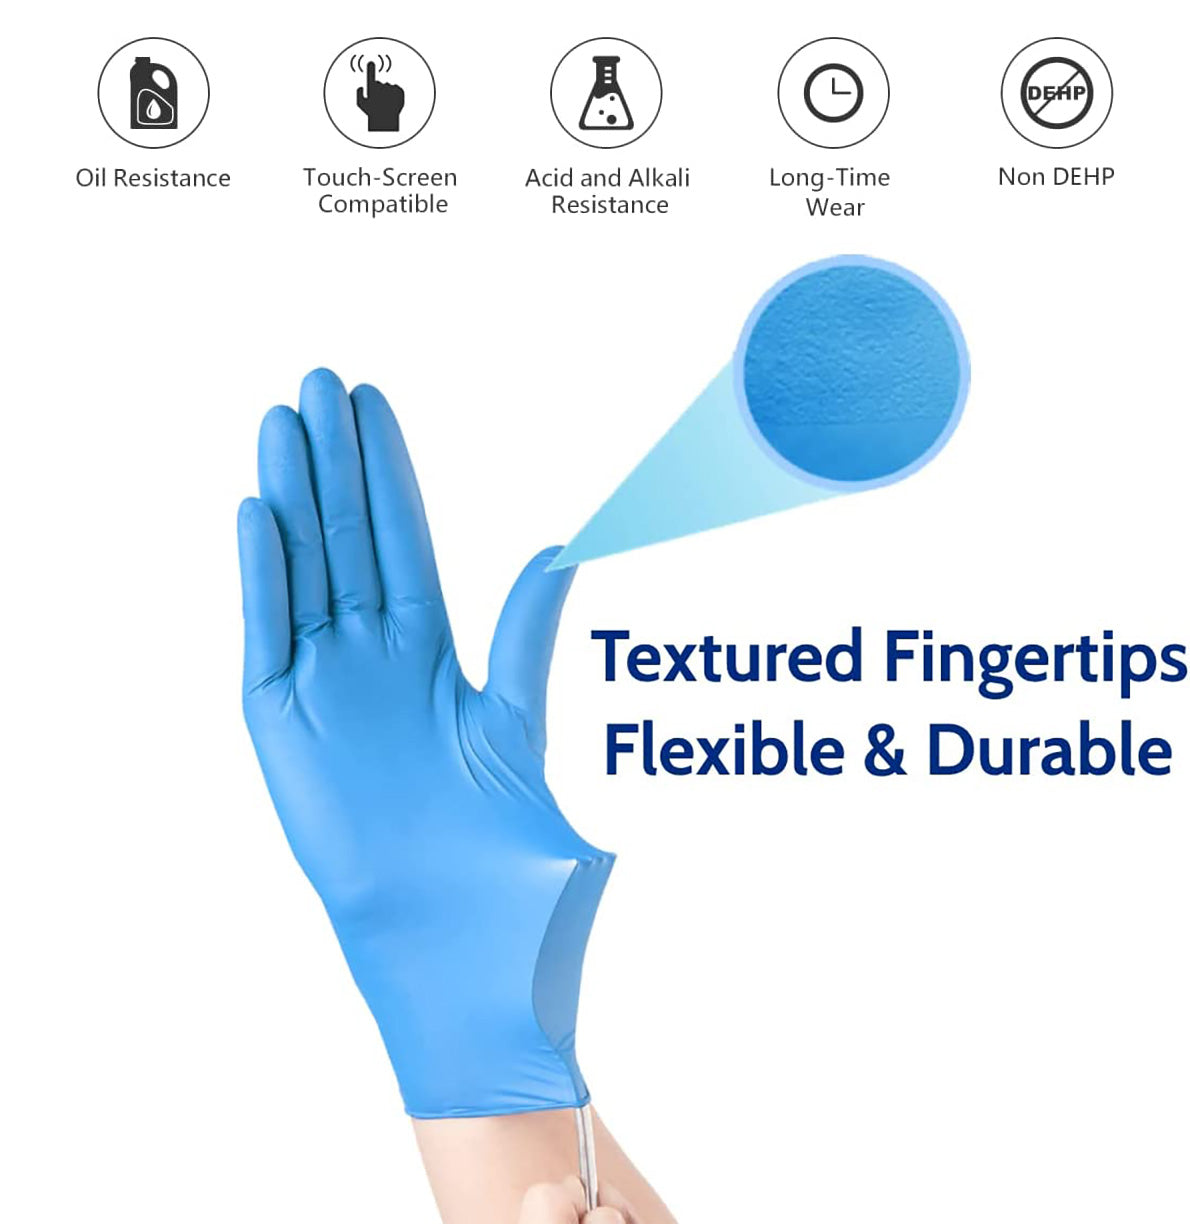 Textured Fingertips Flexible and Durable